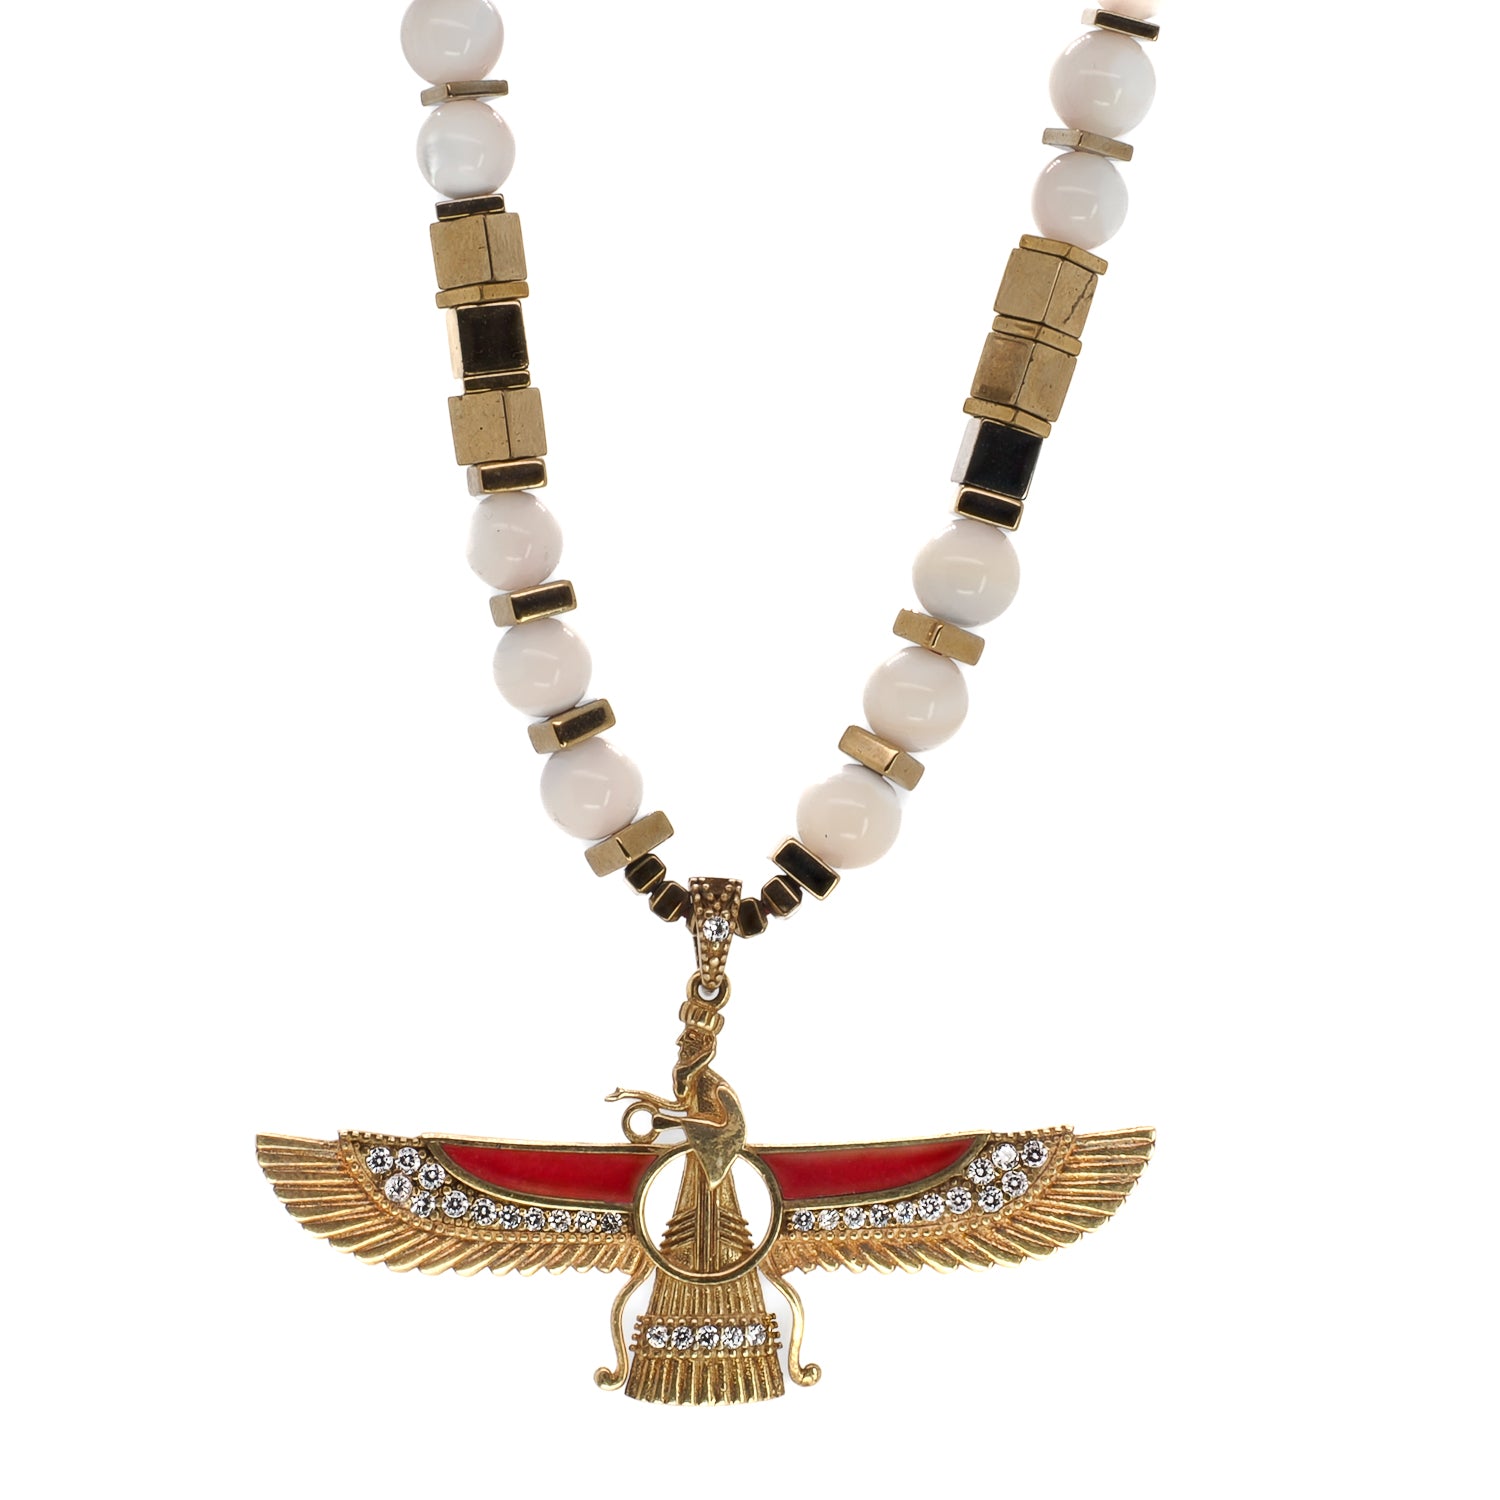 Faravahar Necklace - Handmade jewelry with a meaningful Faravahar pendant, gold hematite and pearl stone beads, and intricate symbolism.